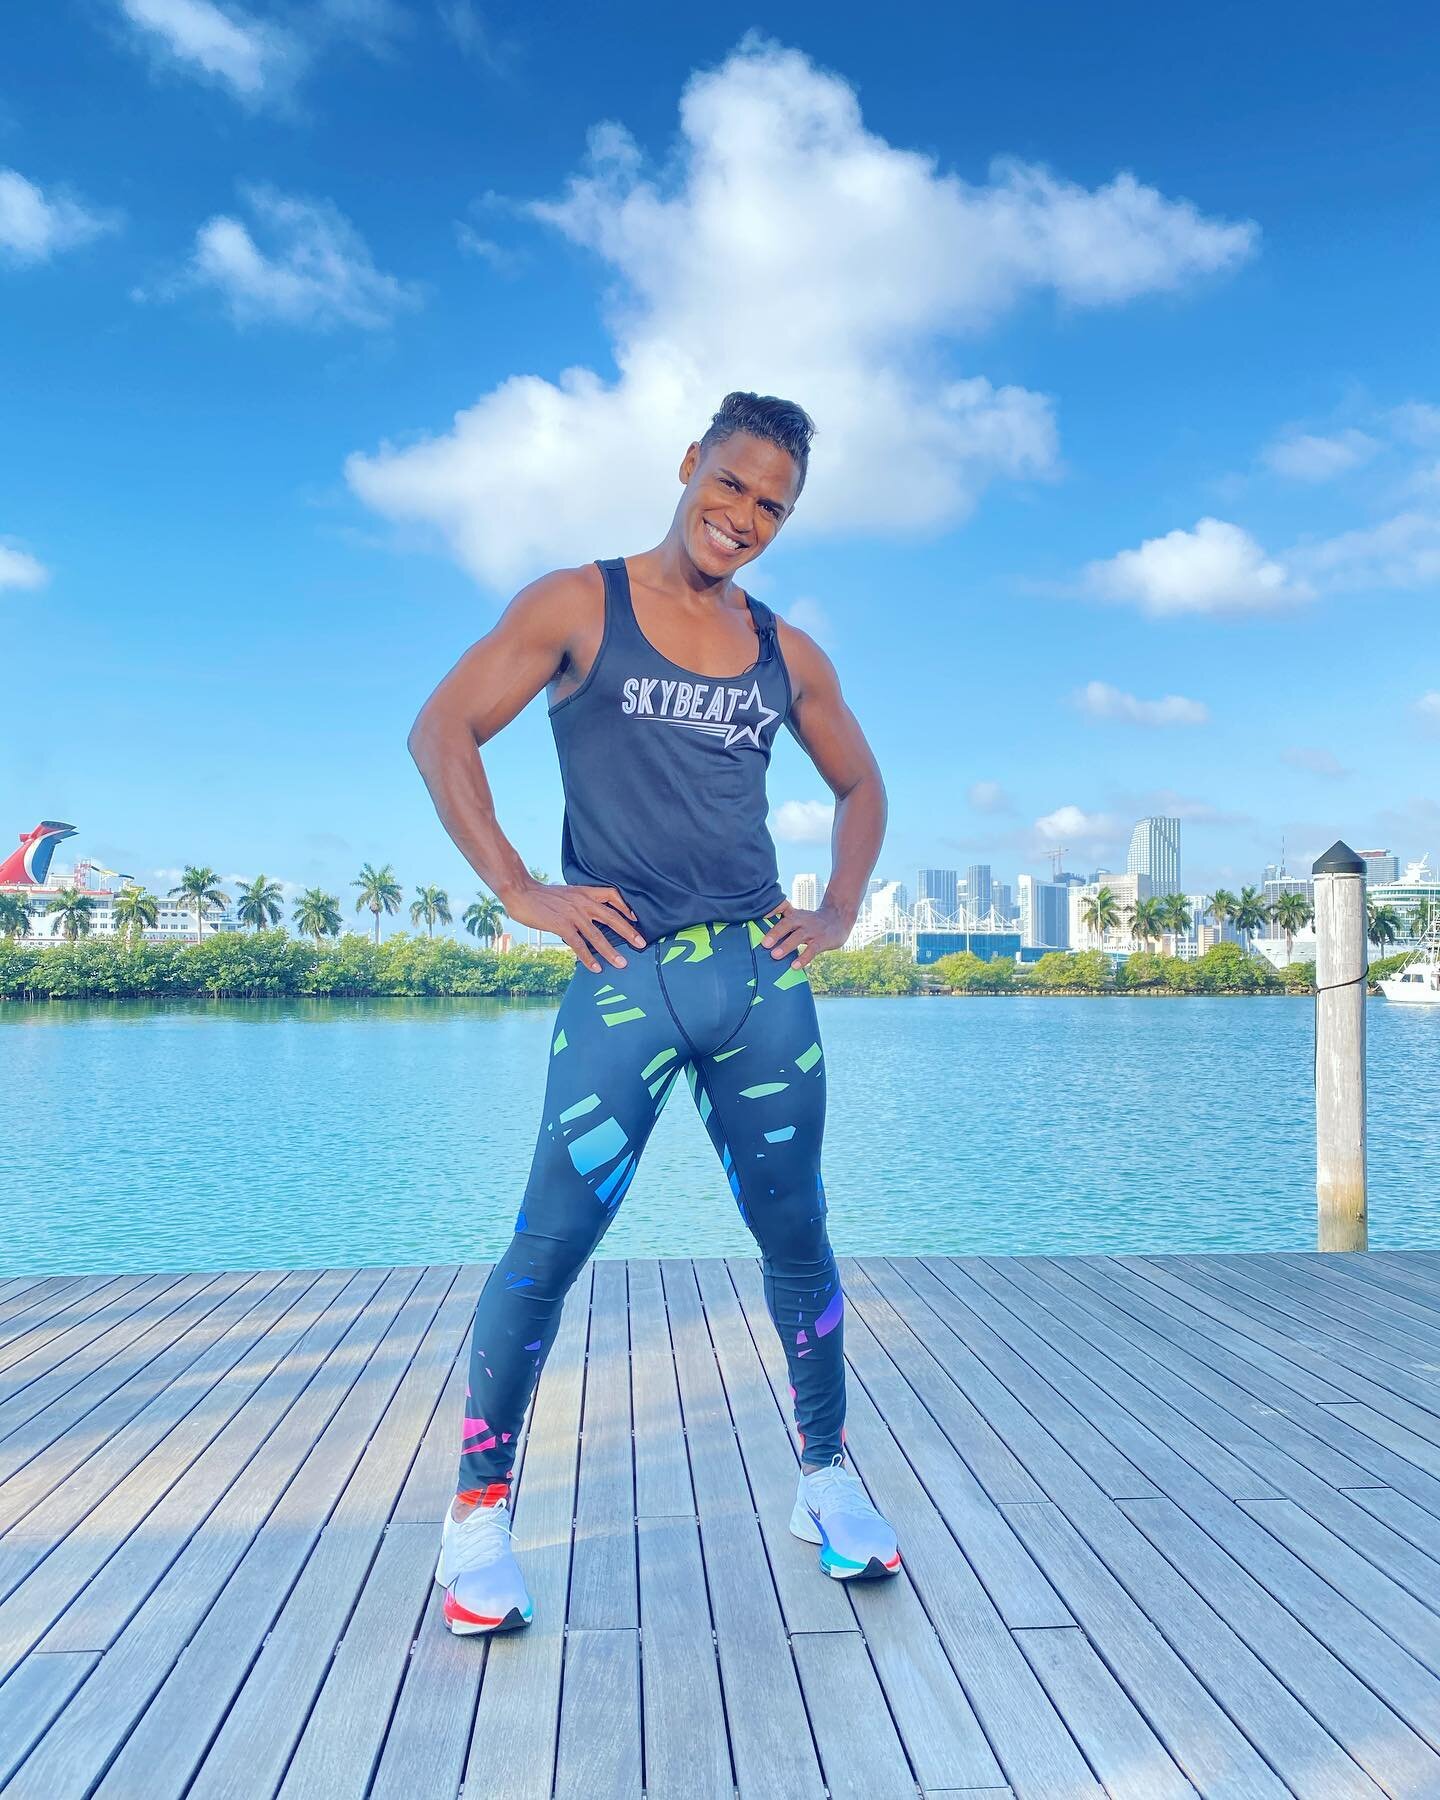 #positivevibes 

Where your focus goes is where your energy will flow . 

Quote from one of my favorite songs &ldquo;Energy&rdquo; by Disclosure 

#skybeat #skybeatdancefitness #community #miami #miamibeach #nike #marcomarco